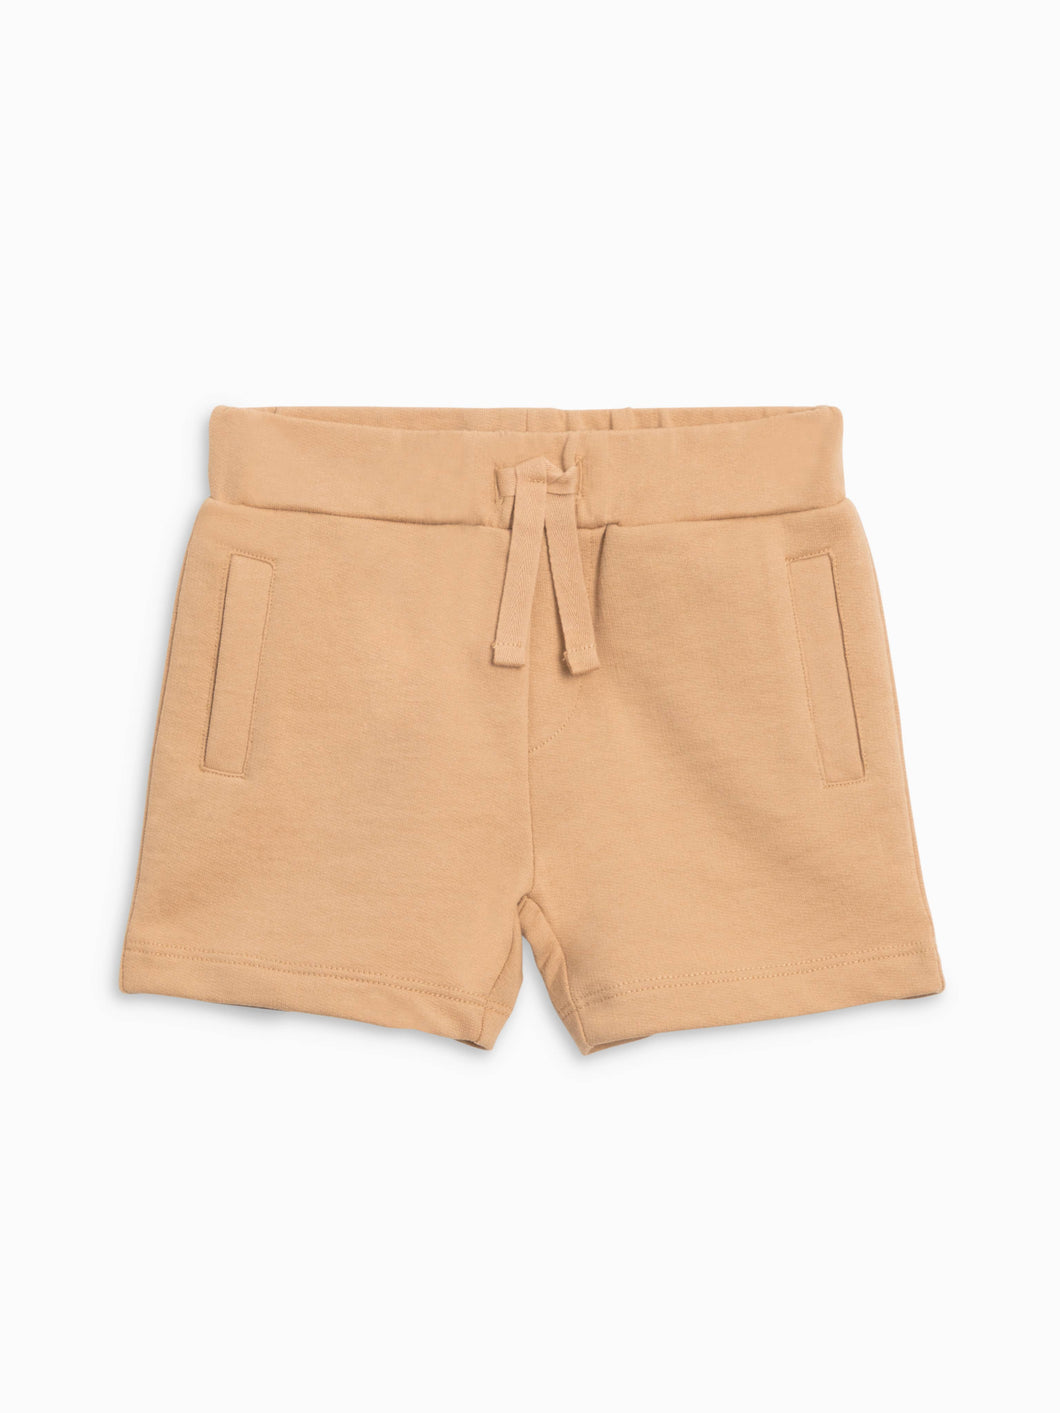 Frisco French Terry Shorts - Tan